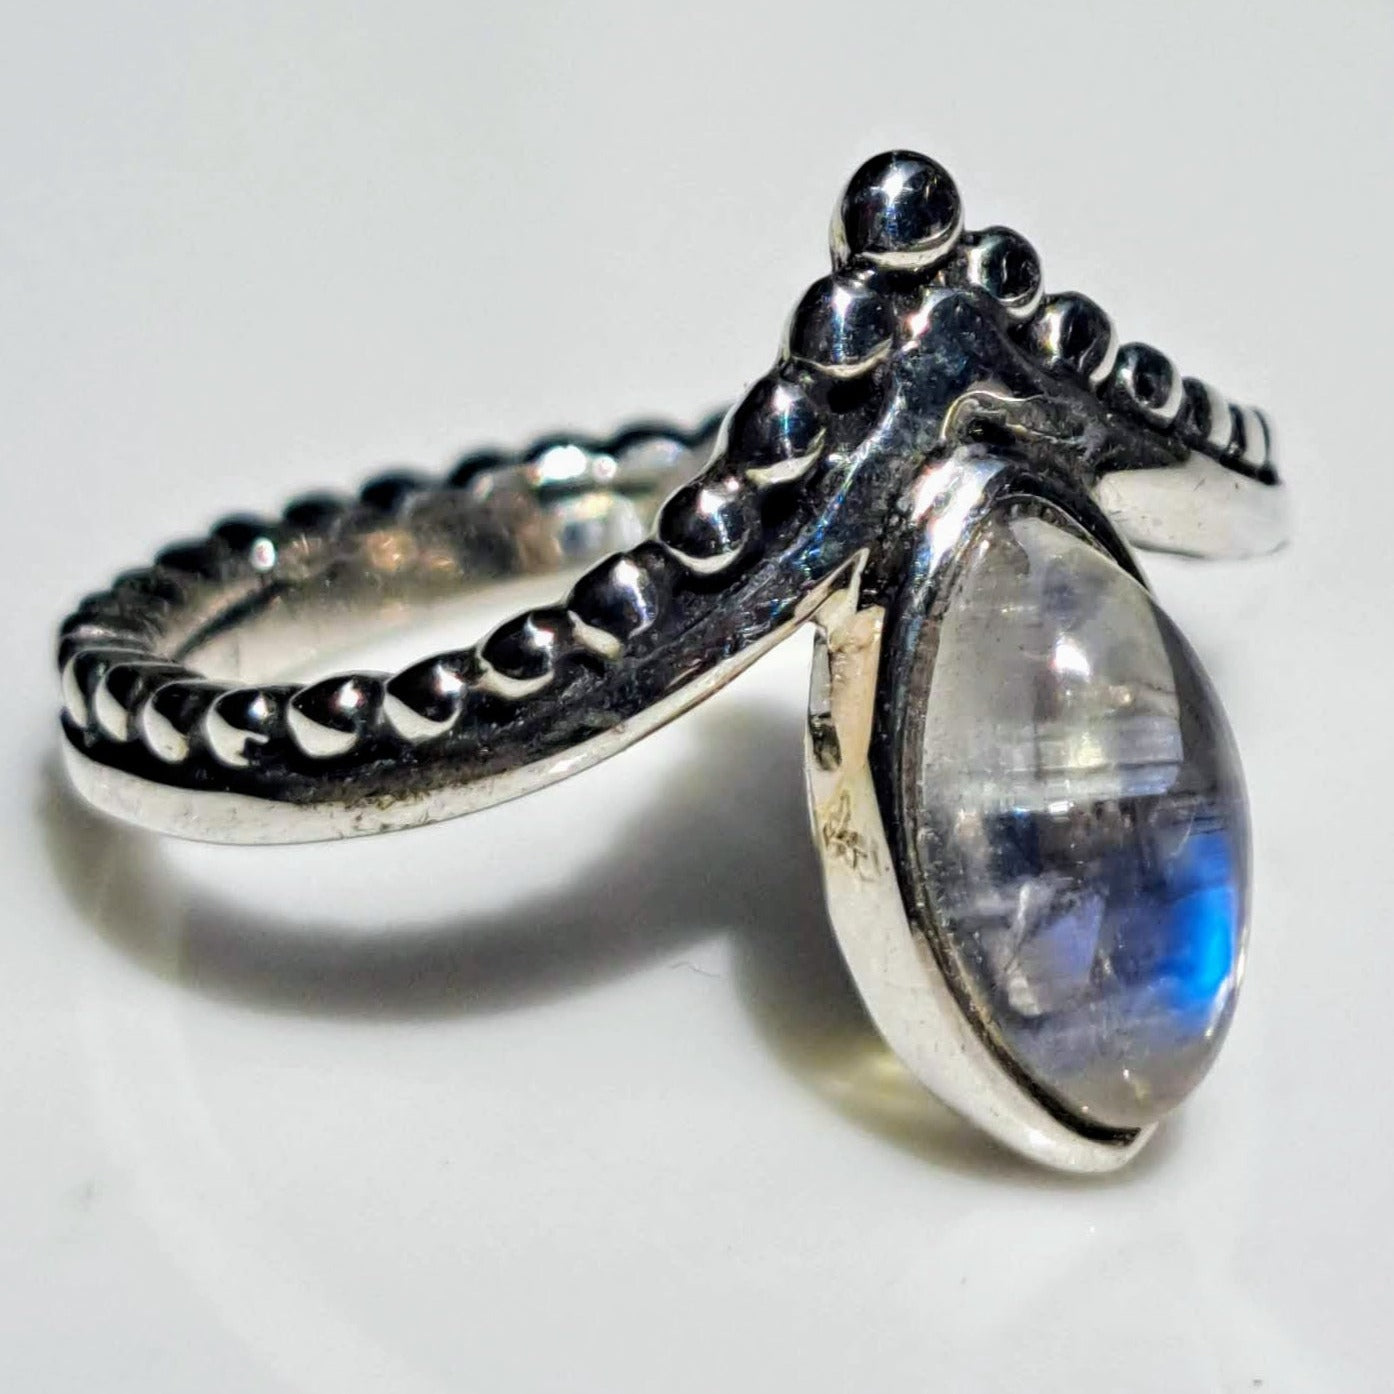 "Tiara" (Choose Your Size) Ring - Moonstone & Sterling